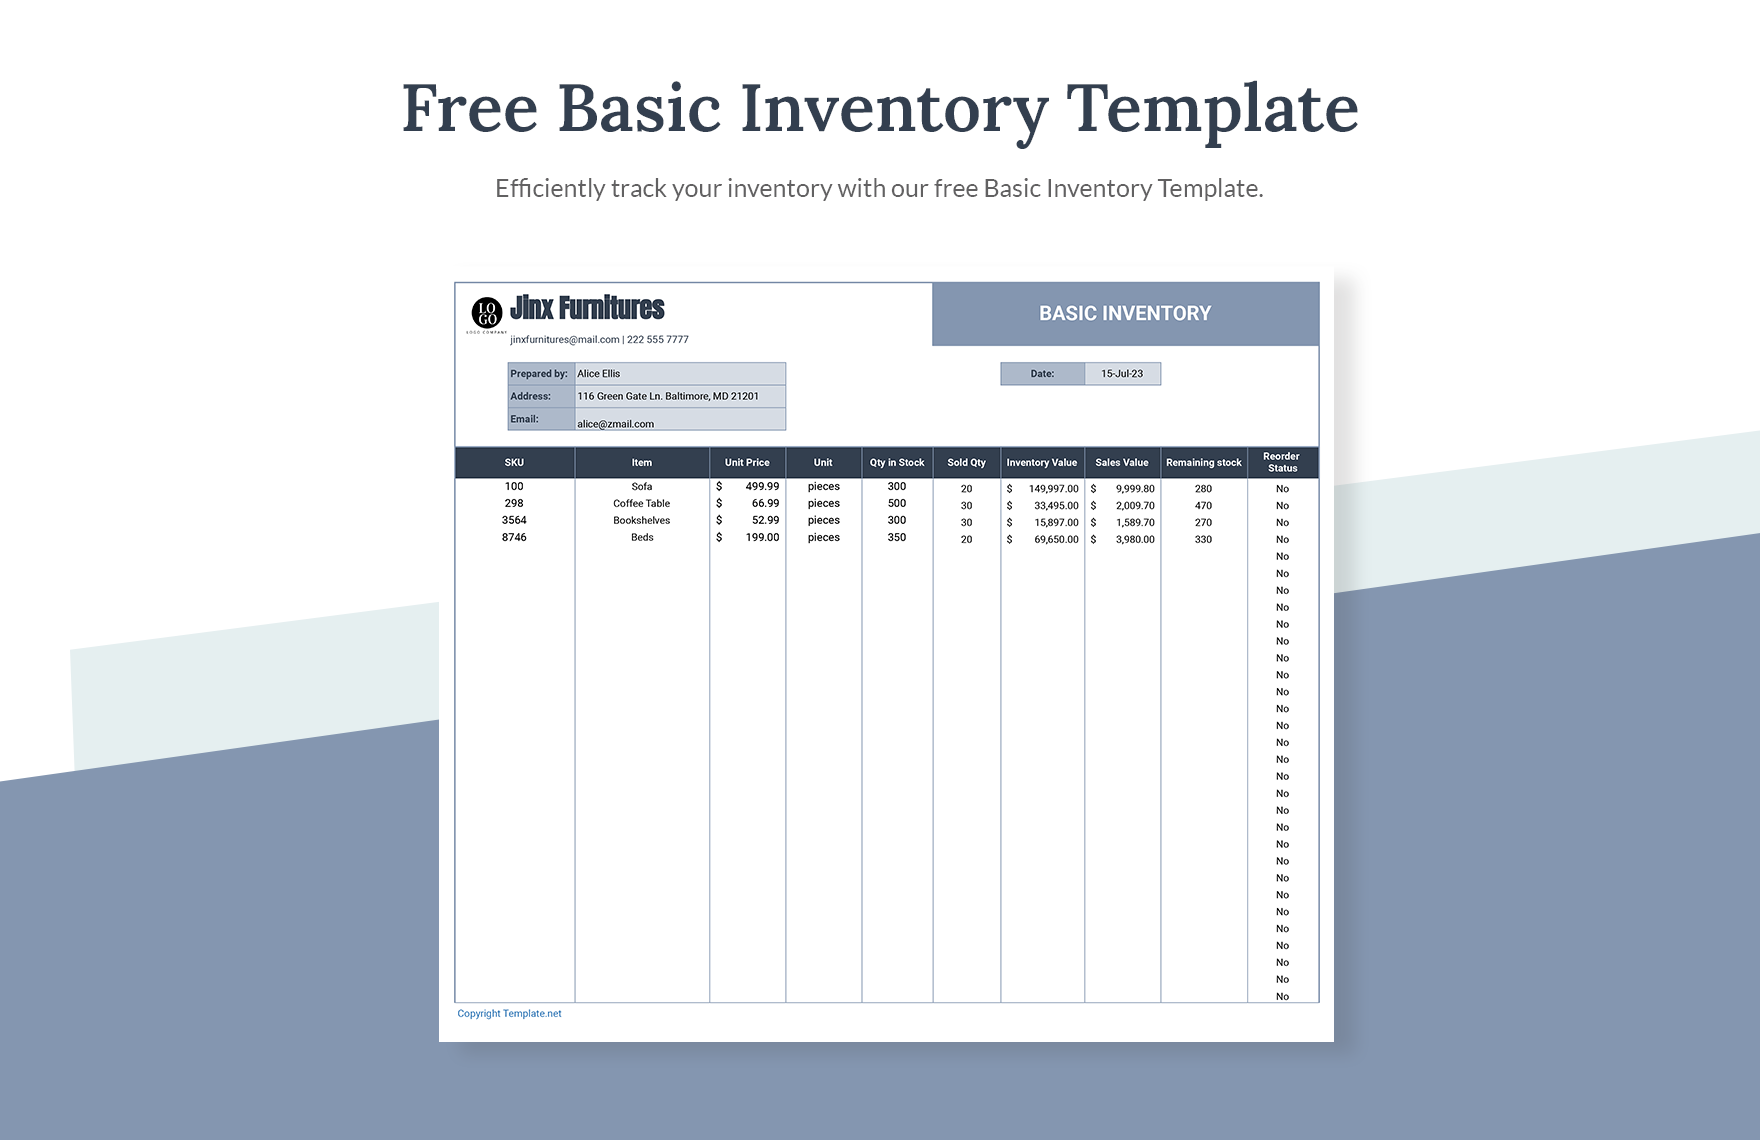 Free Basic Inventory Template